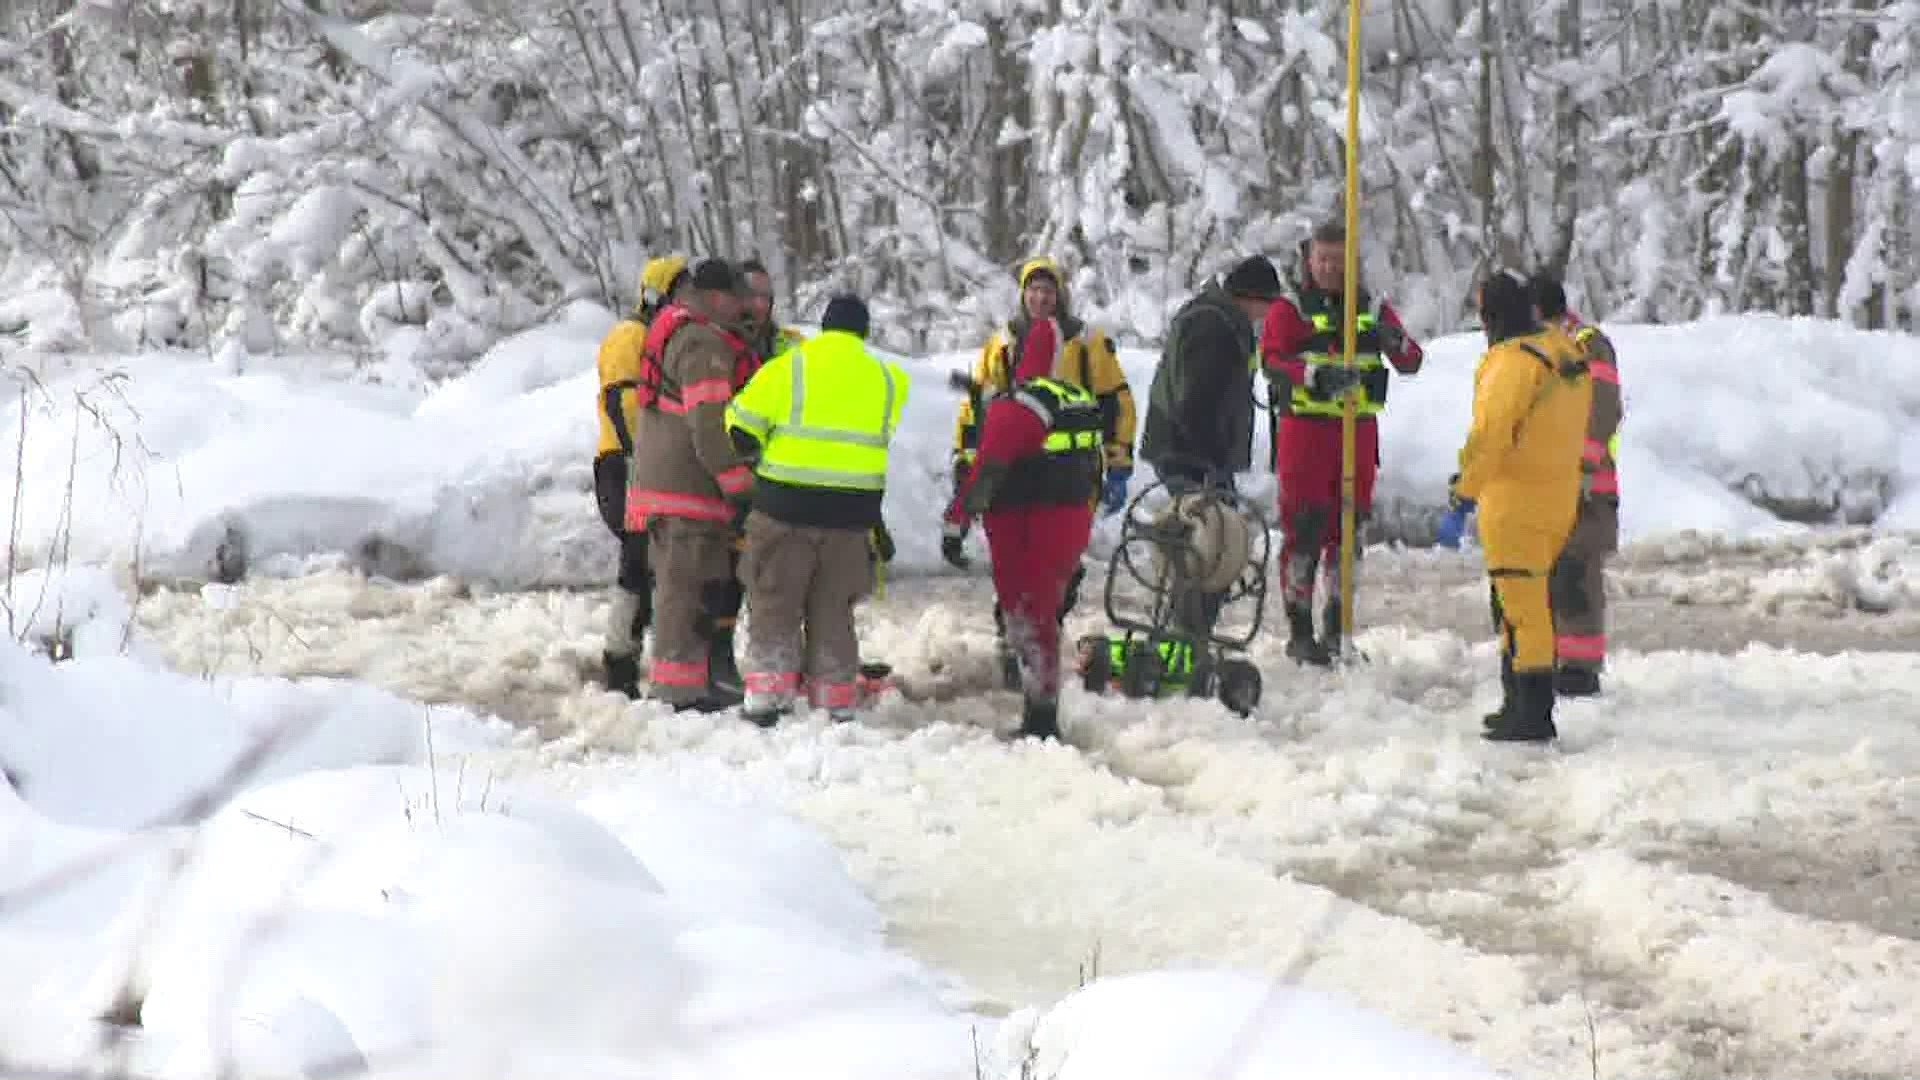 Fisherman falls through ice, The importance of ice safety